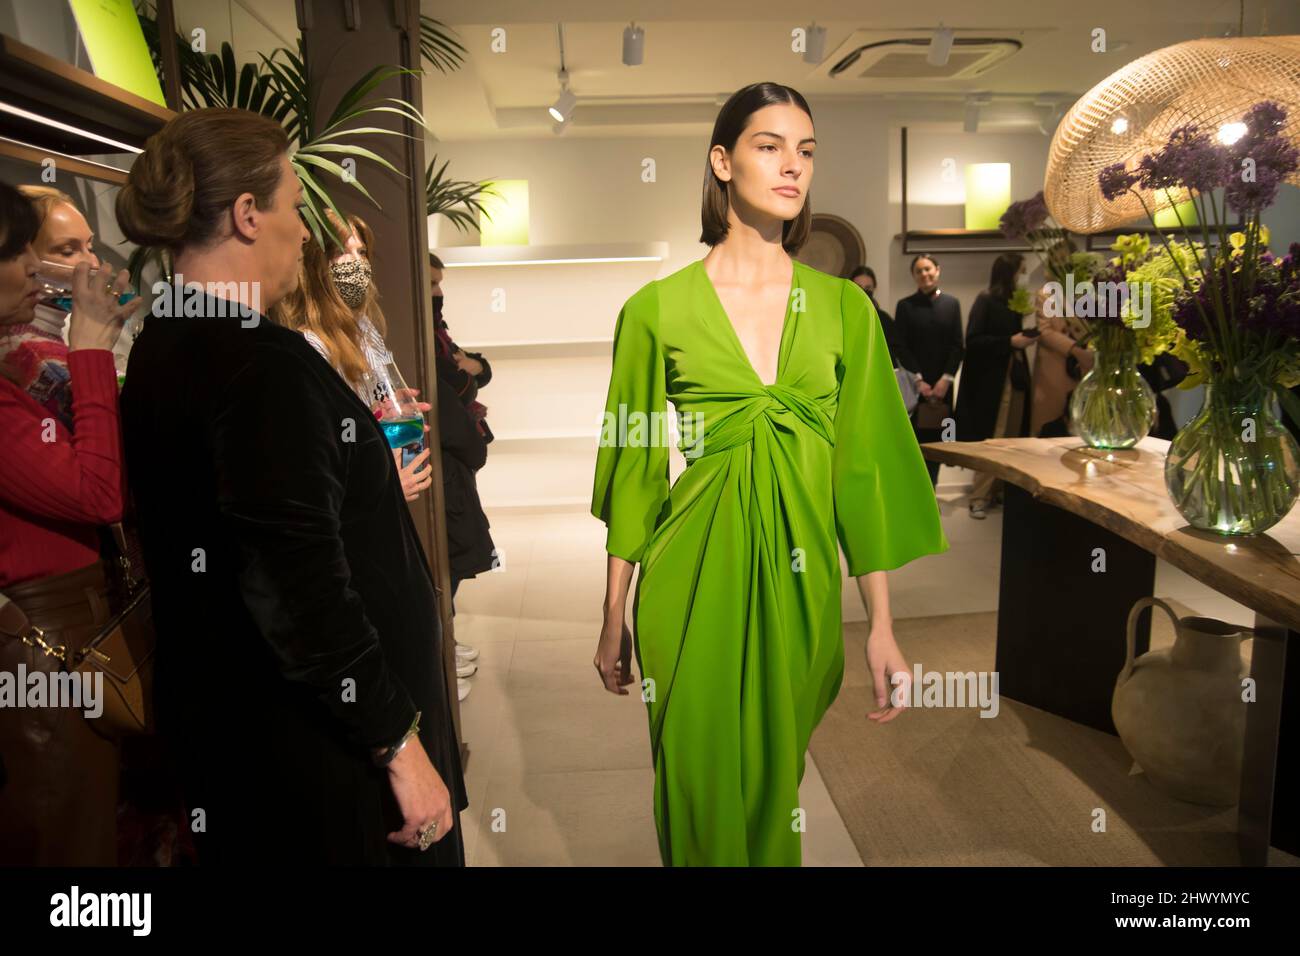 Presentation of the collection by Madrid fashion designer Juanjo Oliva x  SEEIOU store, custom sewing and prêt-à-porter. Juanjo Oliva has been a  fashion designer for names as important as Sybilla or Zara.